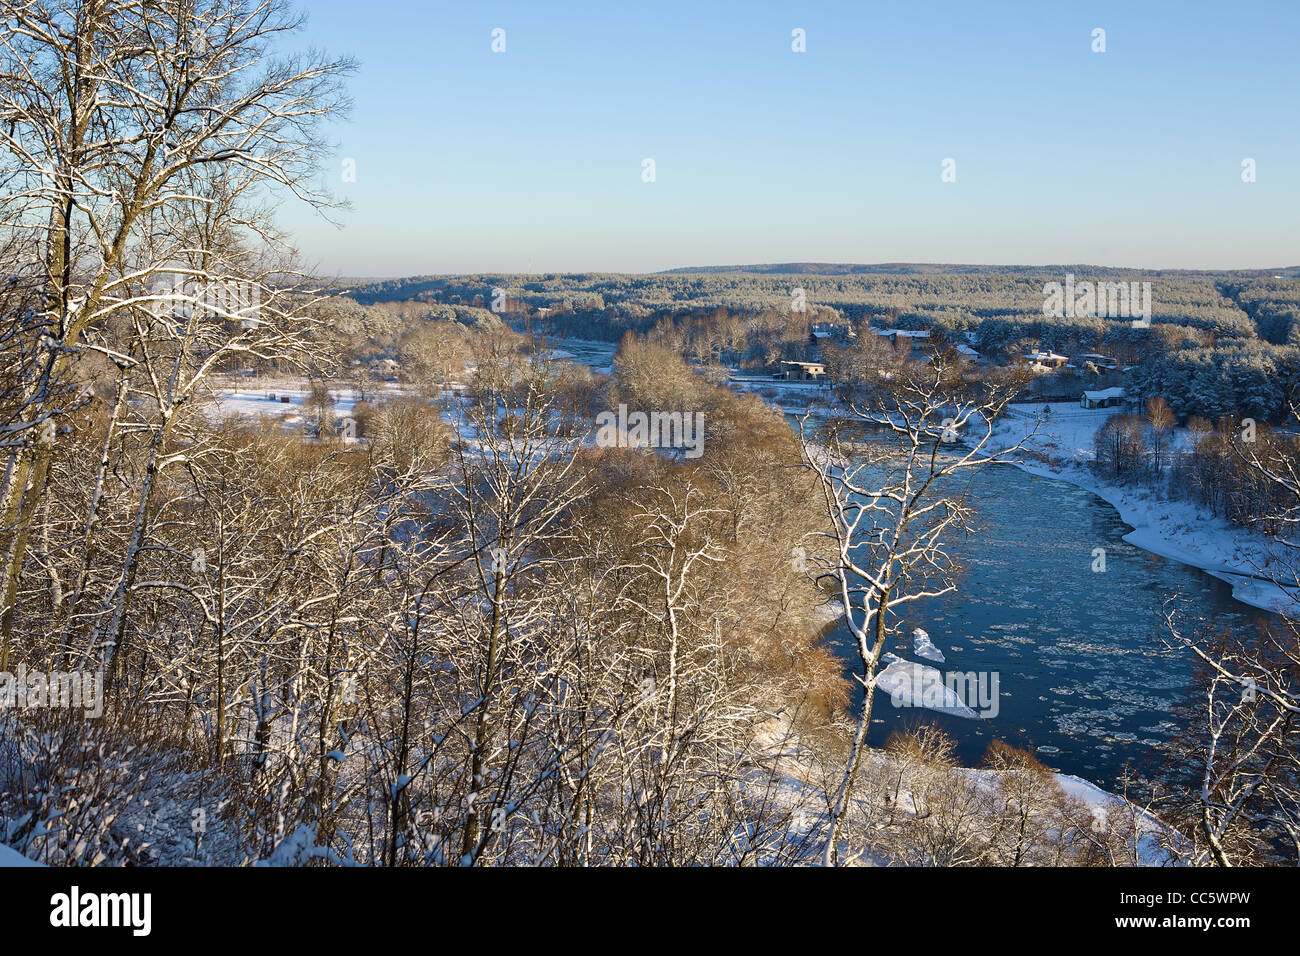 Neris river valley from Verkiai palace, Lithuania Stock Photo